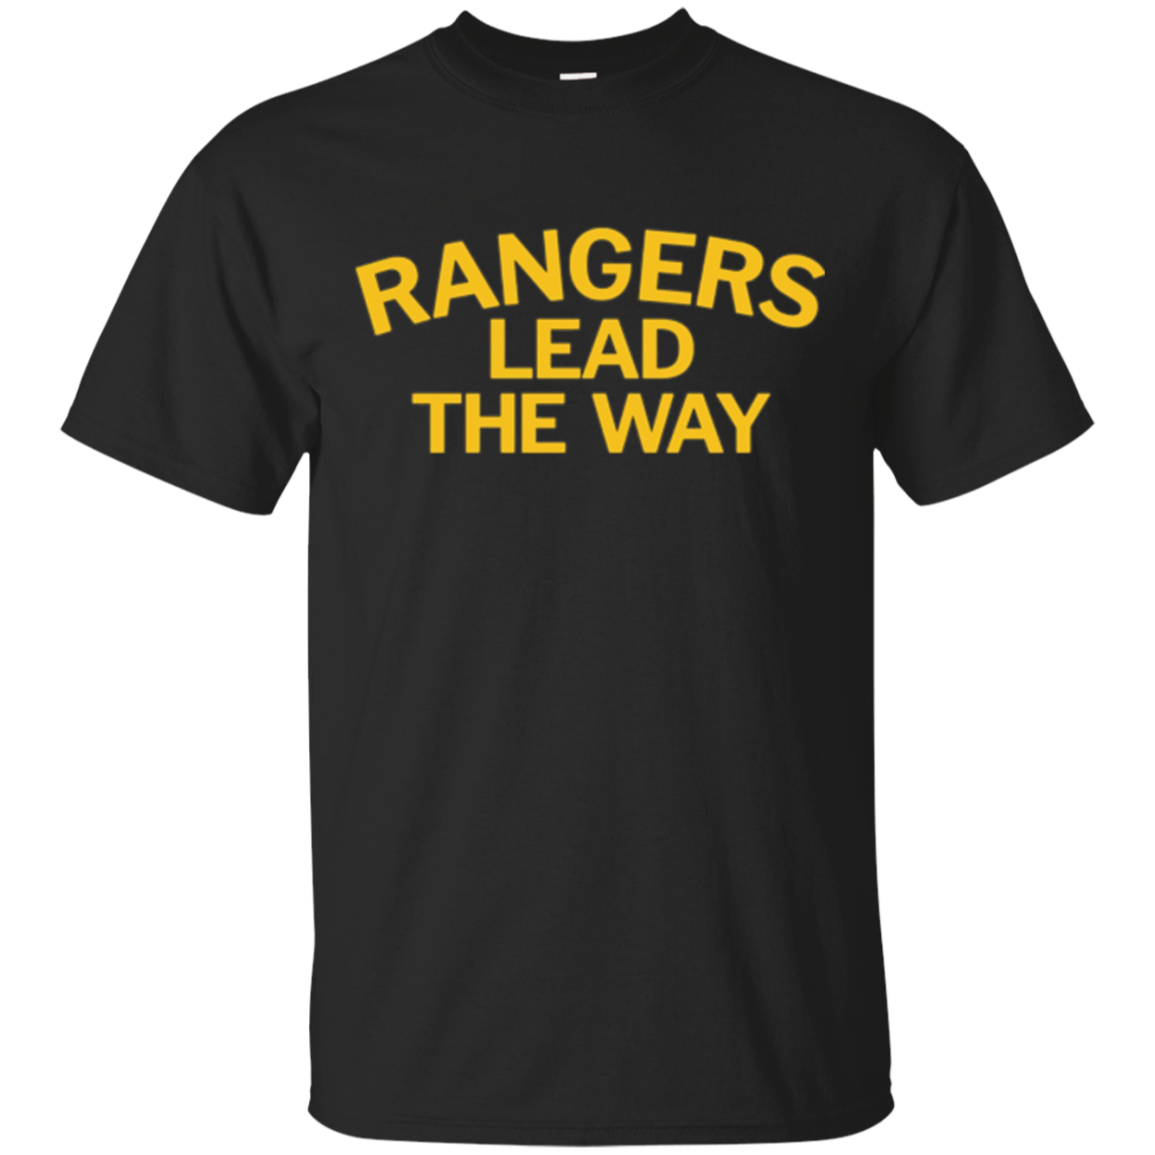 Army Rangers Lead The Way T-shirt